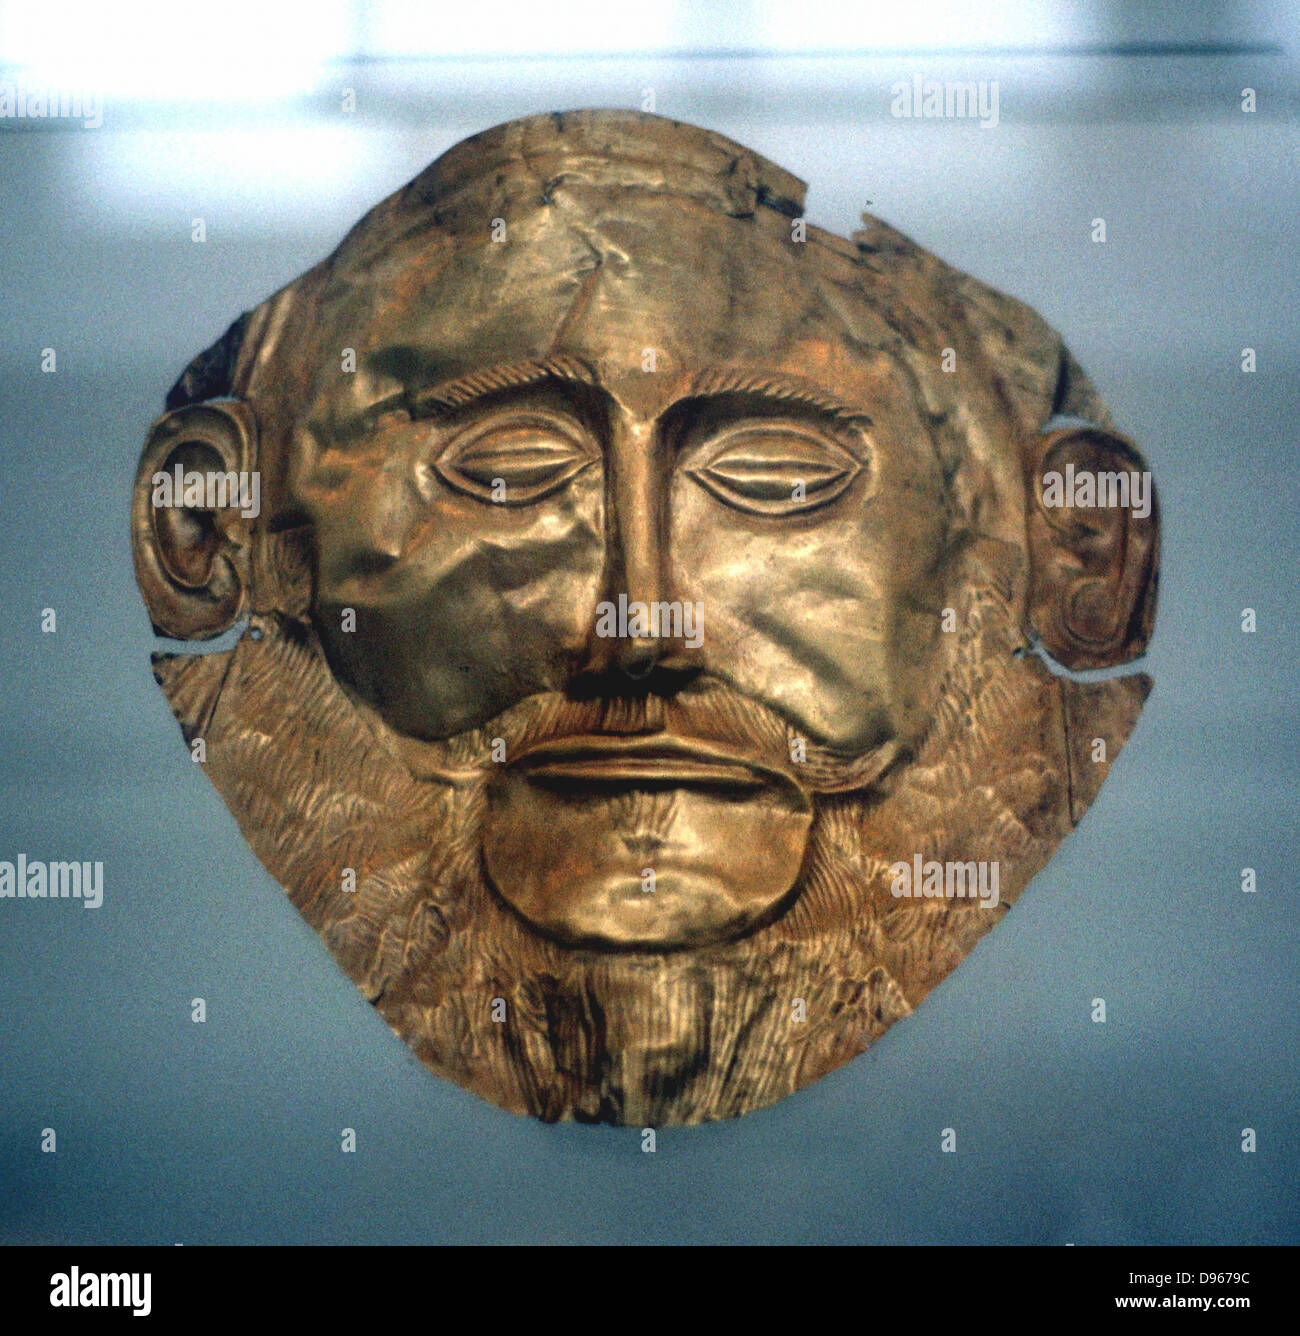 Agamemnon, legendary king of Mycenae and leader of the punitive Greek expedition against Troy. Gold funerary mask, Mycenae c1600-1500 BC reputed to be that of Agamemnon Stock Photo